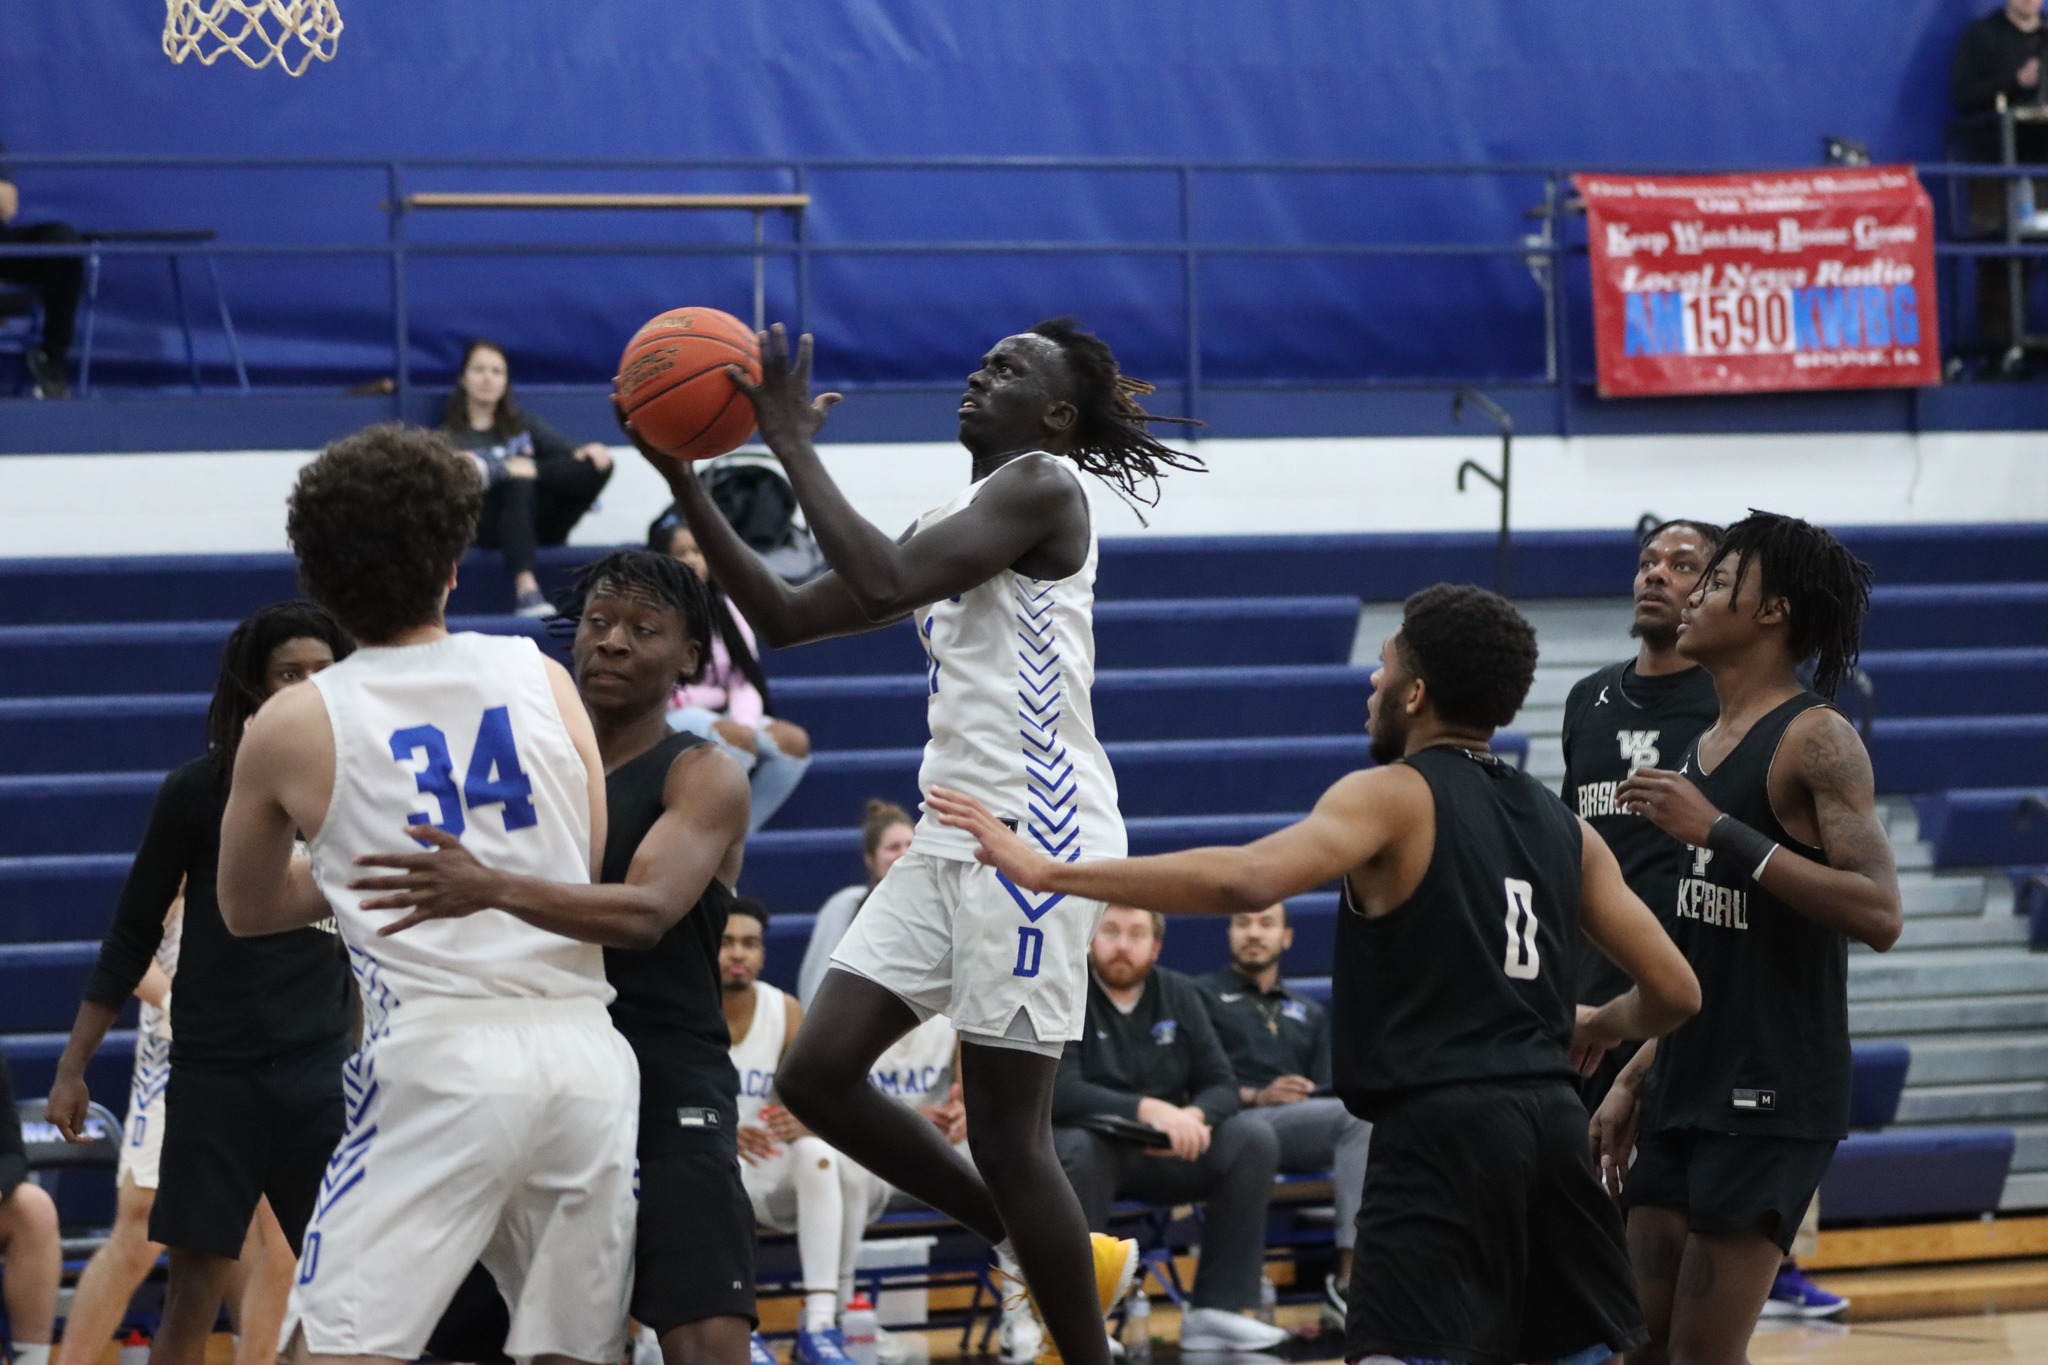 DMACC men's basketball team drops 82-80 decision to ICCC